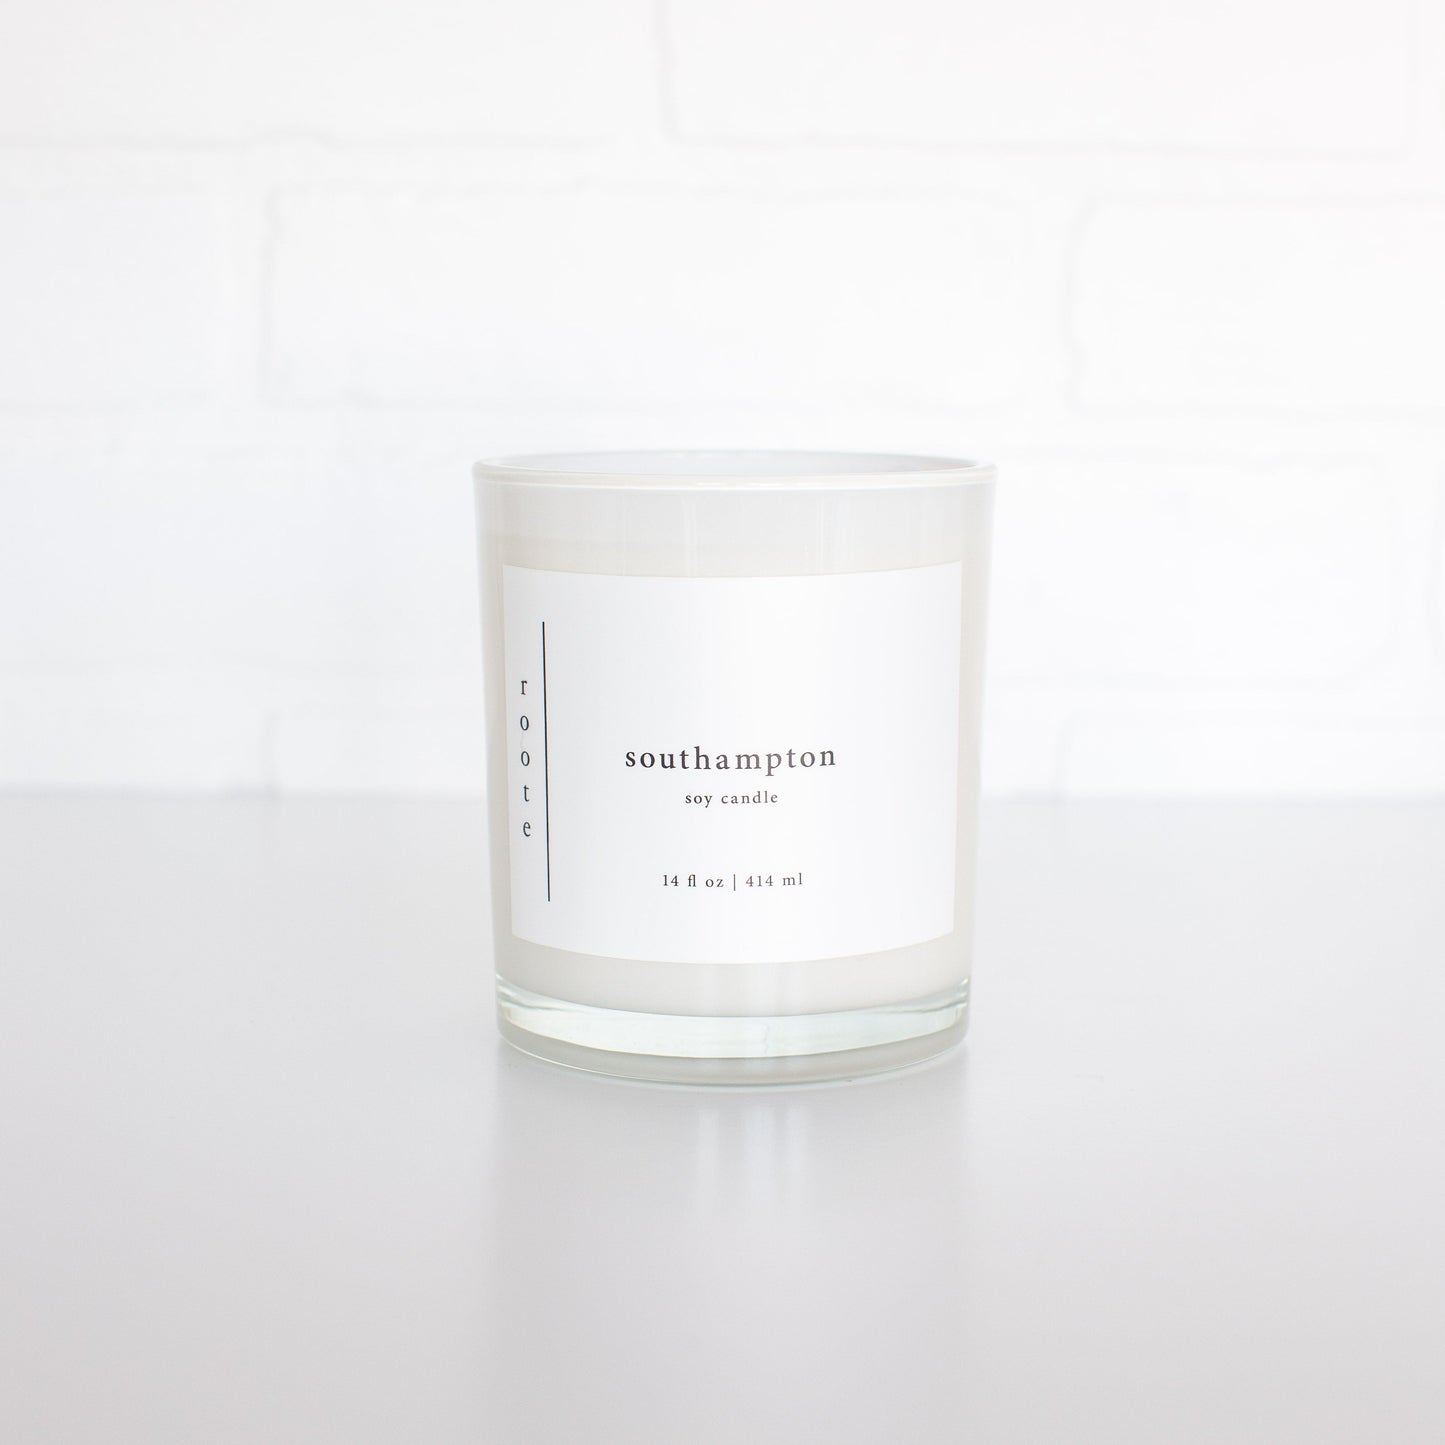 Southampton Soy Candle - ROOTE - Soy Candle